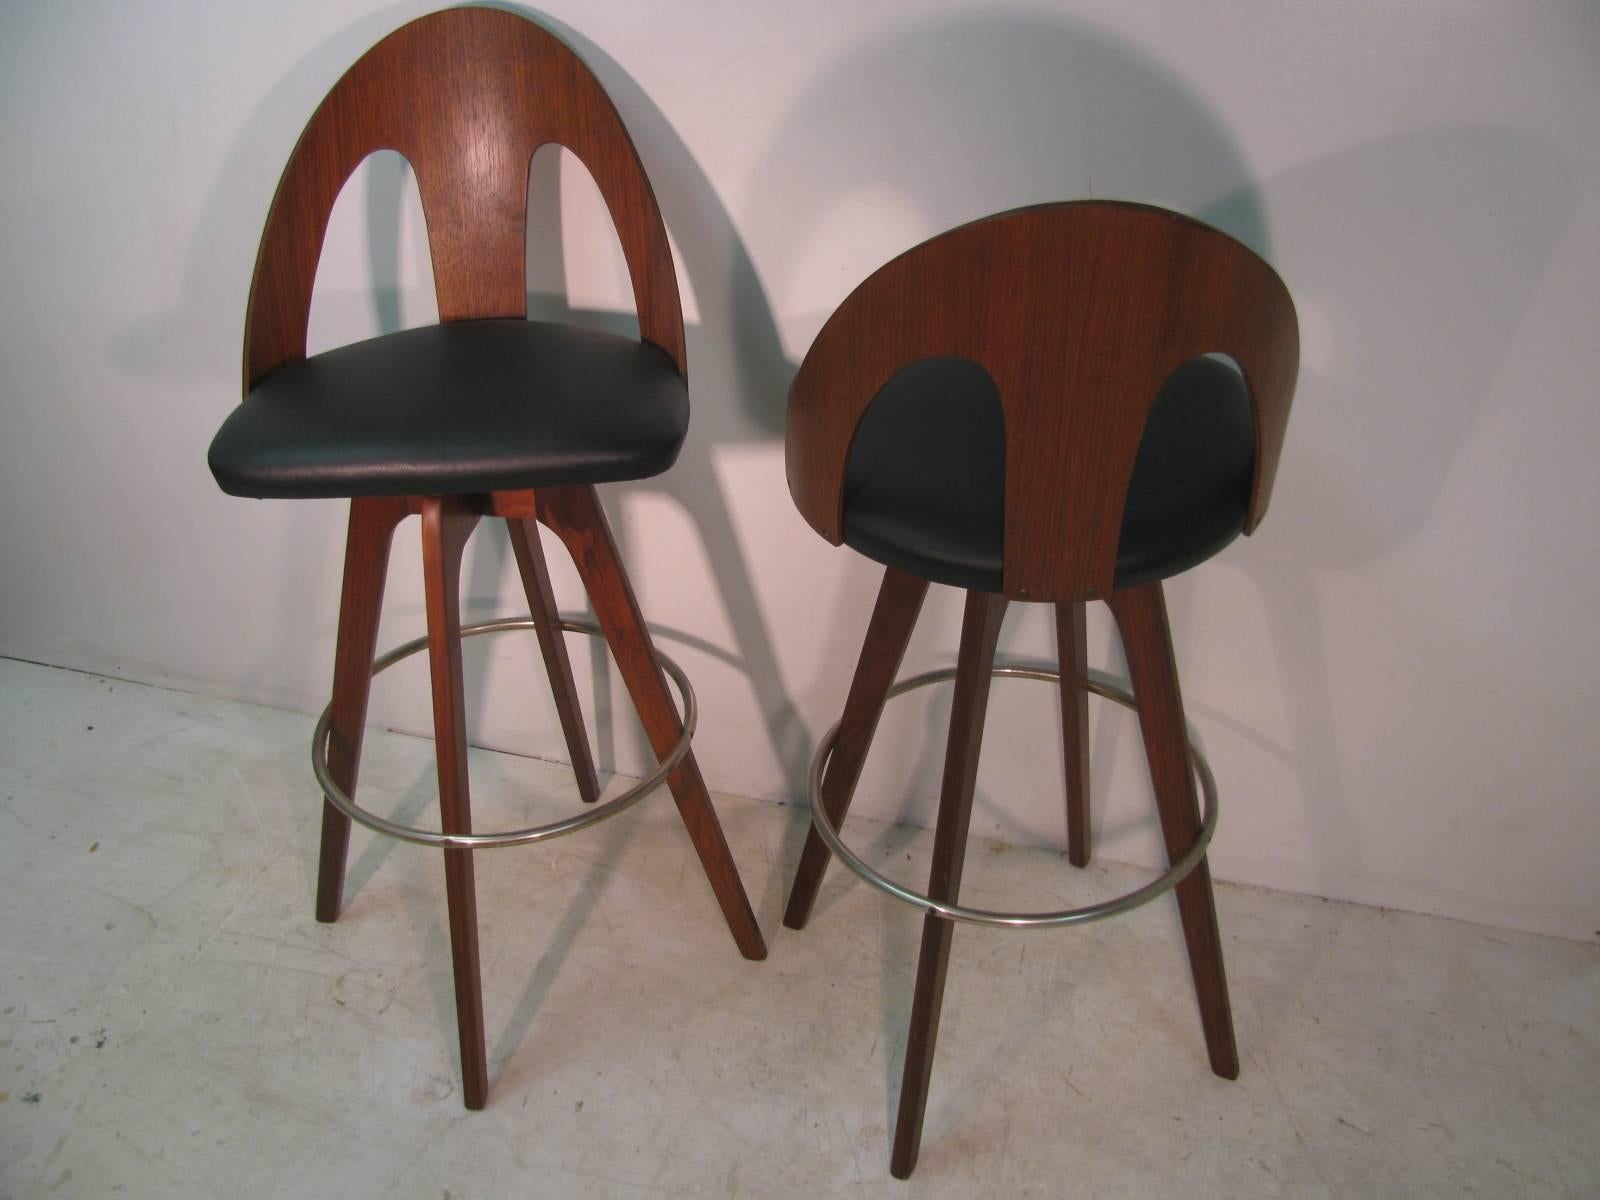 Fabulous pair of walnut pierced spoon back bar stools. Solid walnut back and legs created by Chet Beardsley. Chrome foot ring shows some normal wear.